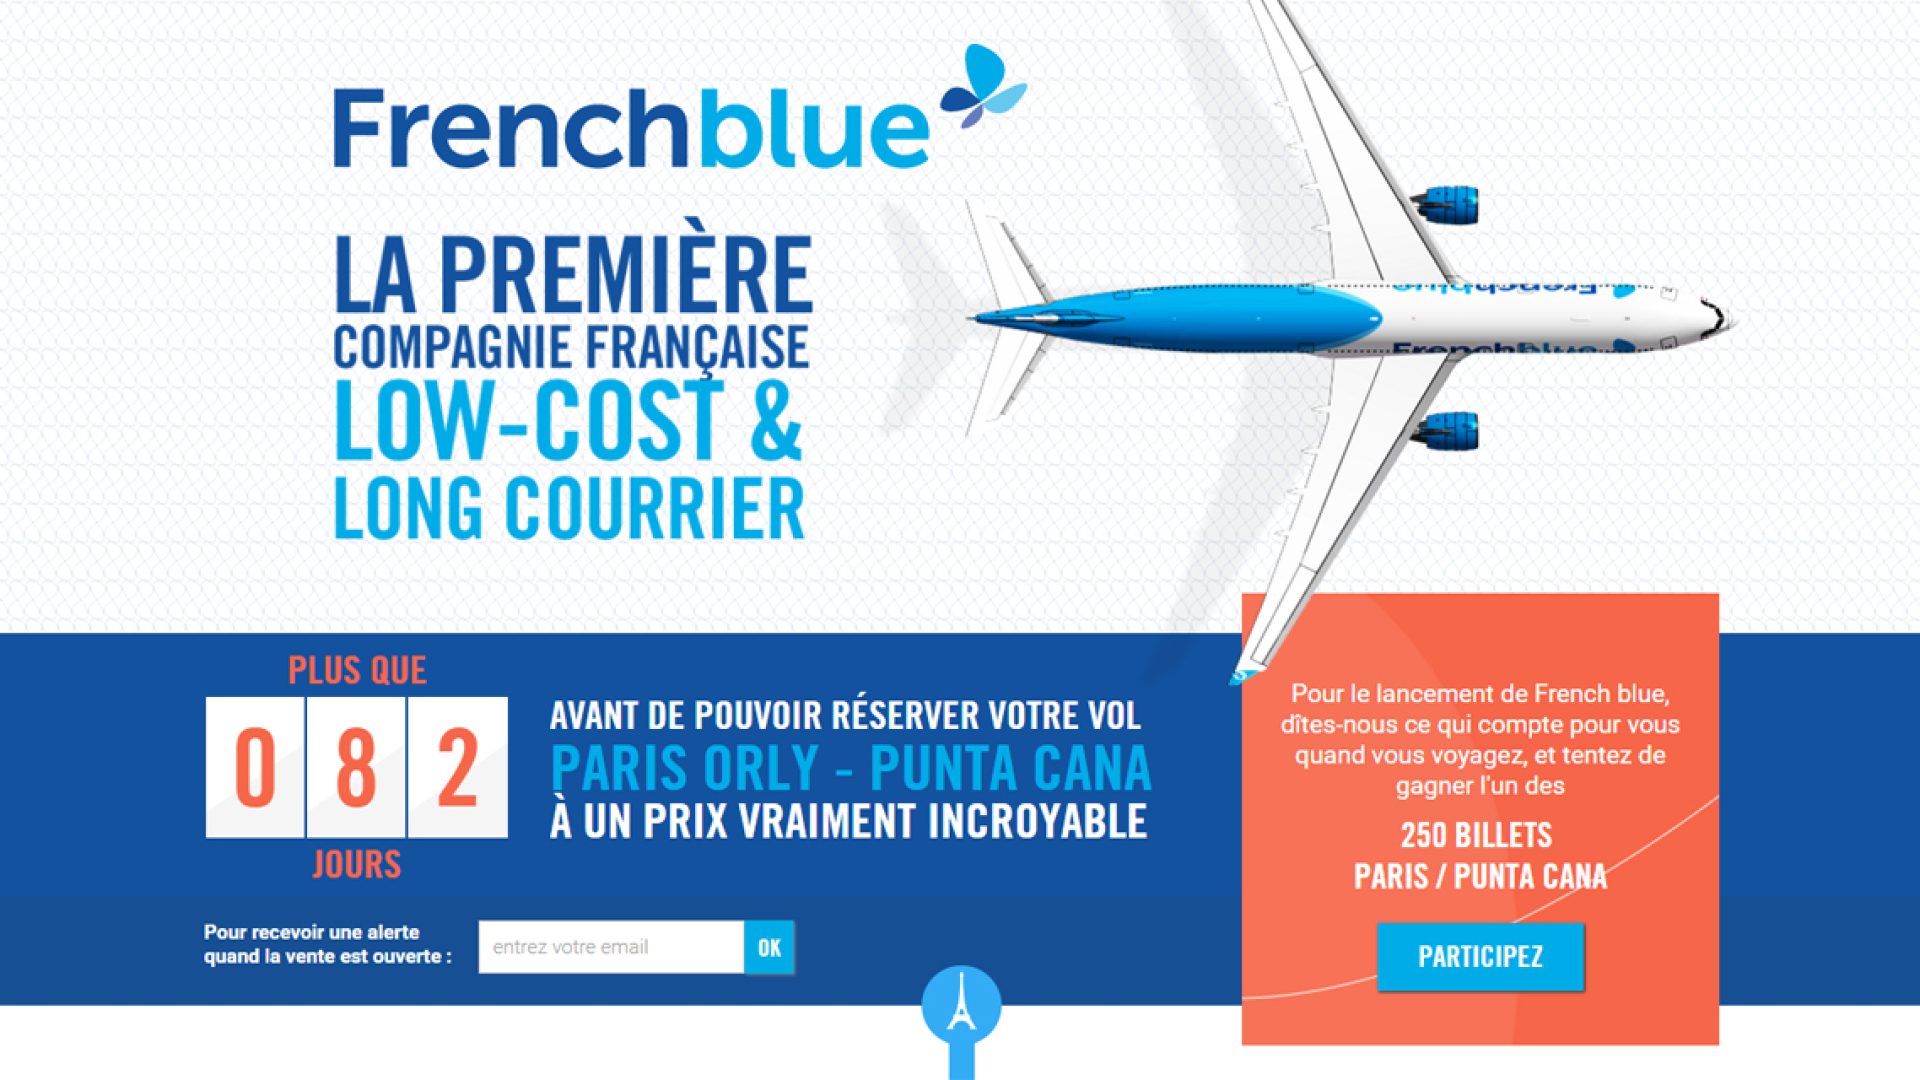 2643-cover-french-blue-premiere-compagnie-low-cost-francaise-sur-long-courriers